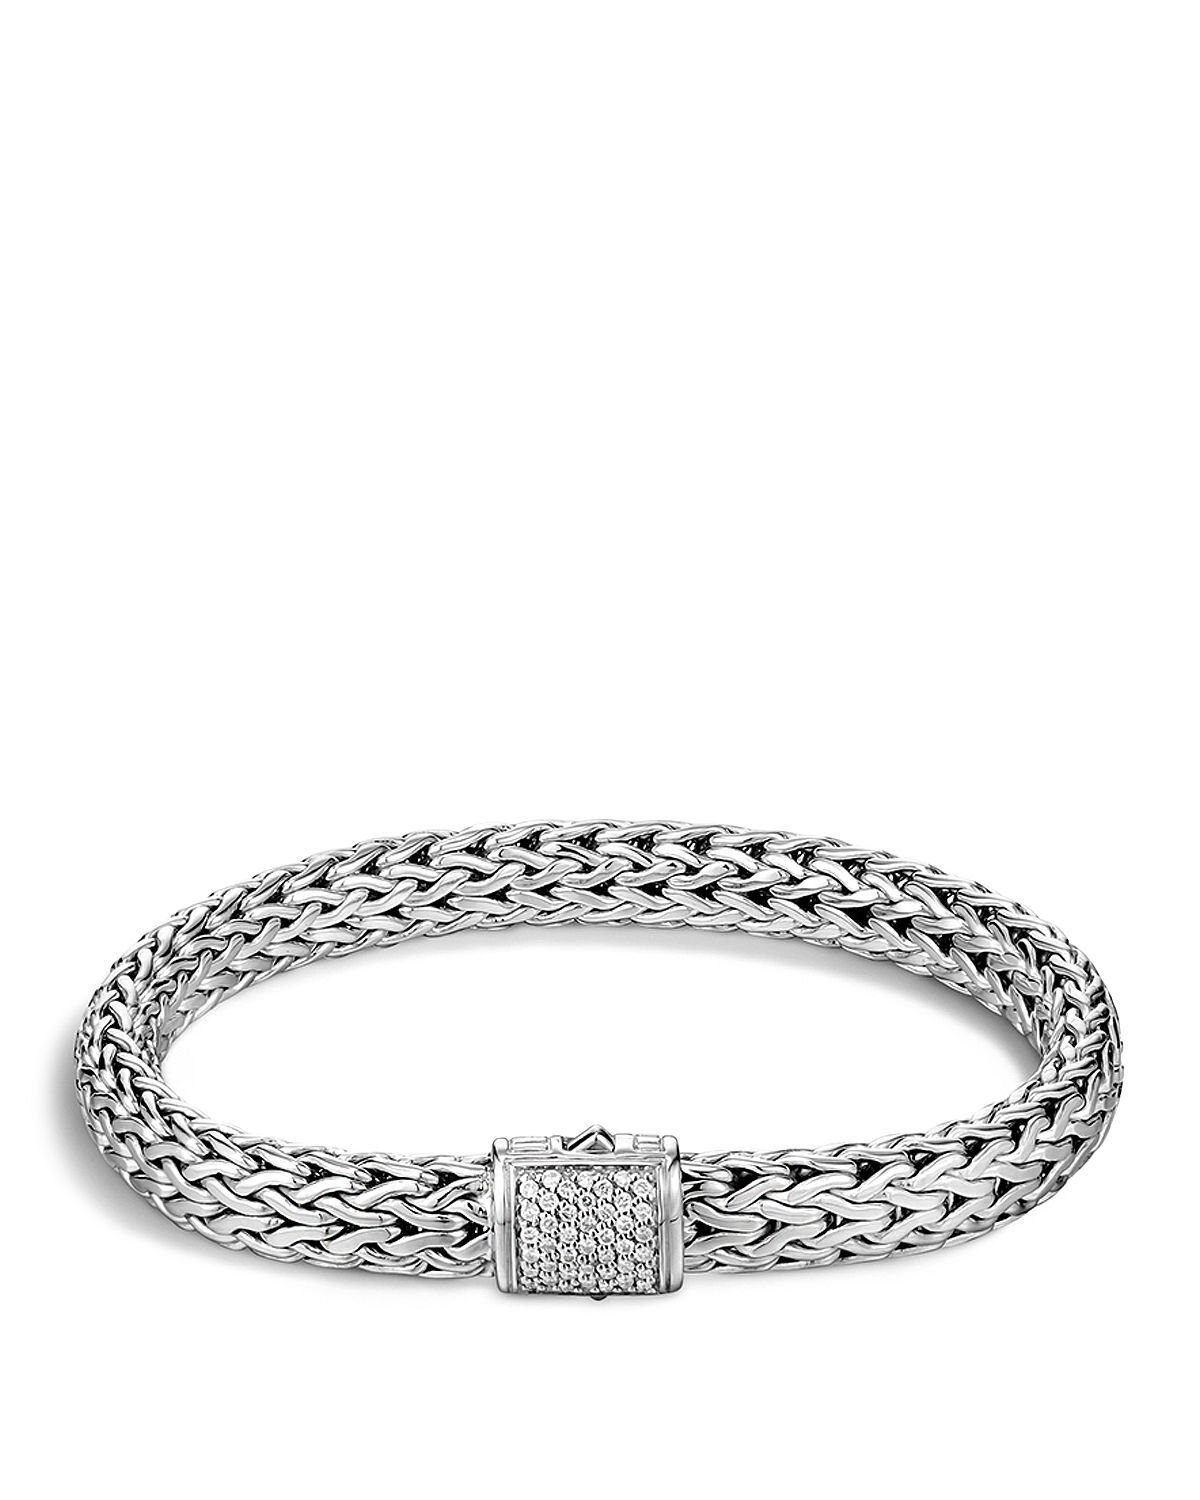 Classic Chain Bracelet Sterling Silver with Diamonds